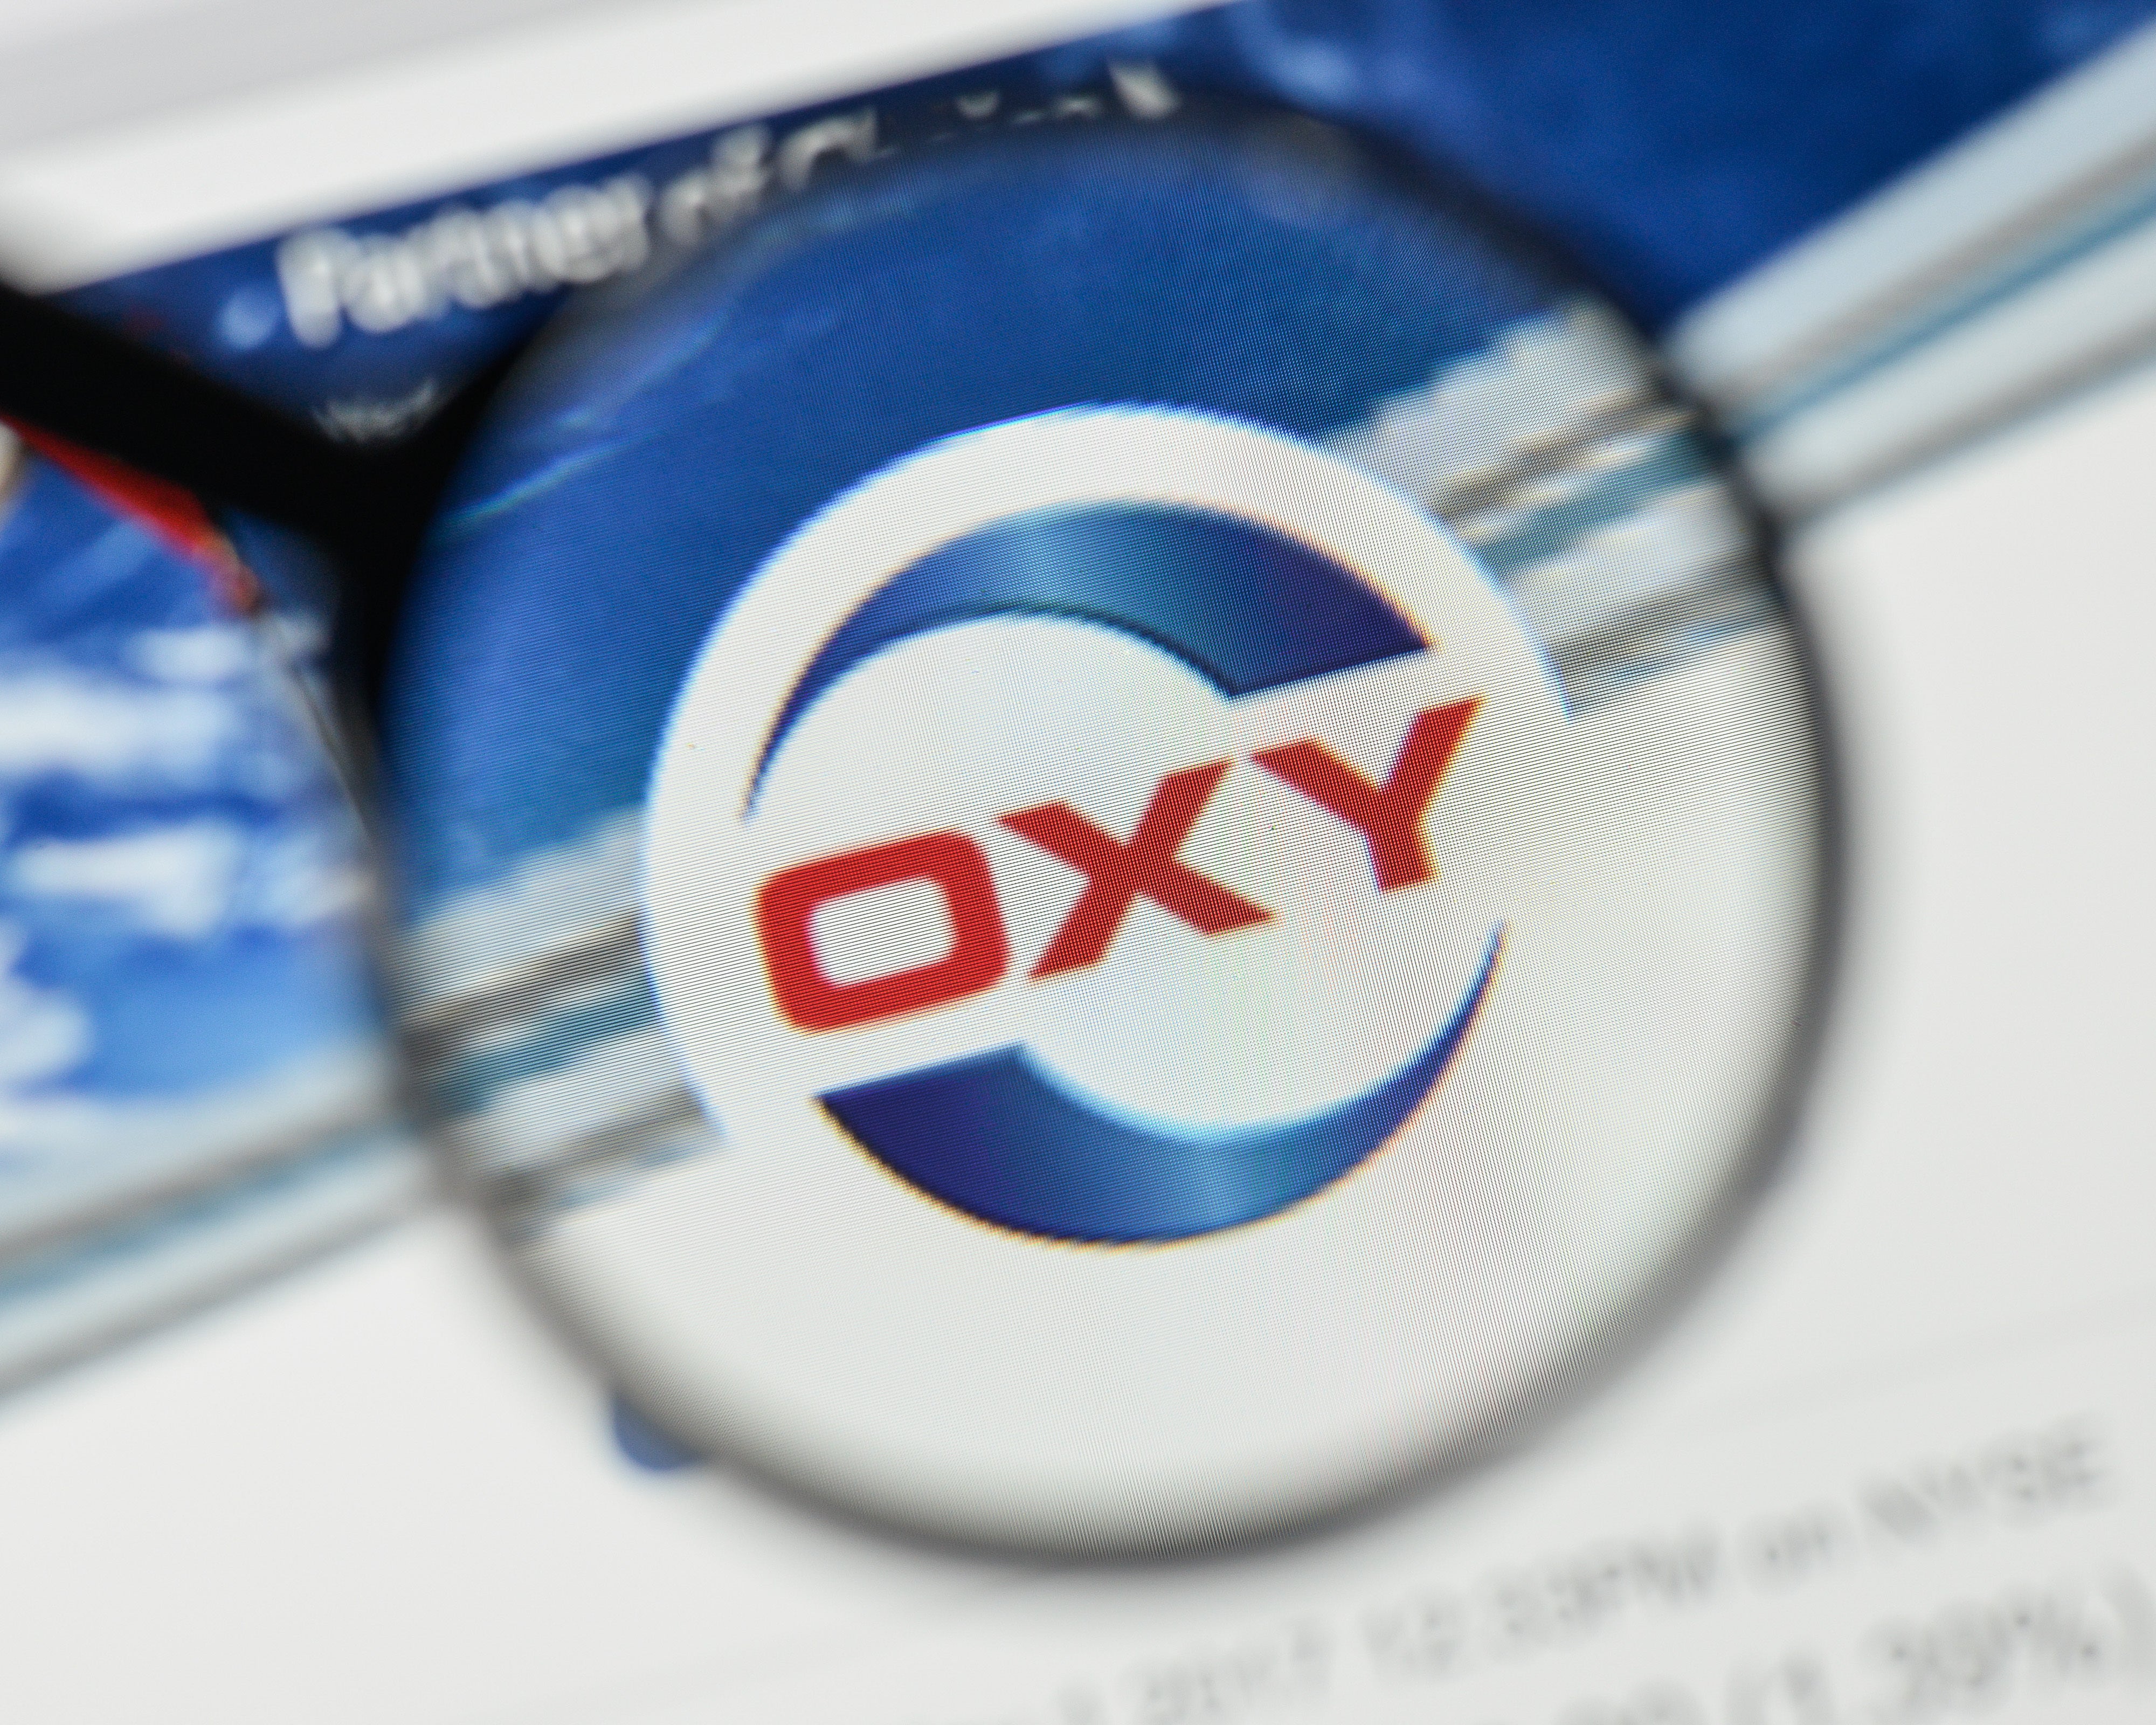 Warren Buffett's Berkshire Hathaway Adds $352M Stake In Occidental Petroleum This Week: Stock Nearly Doubles In 2022